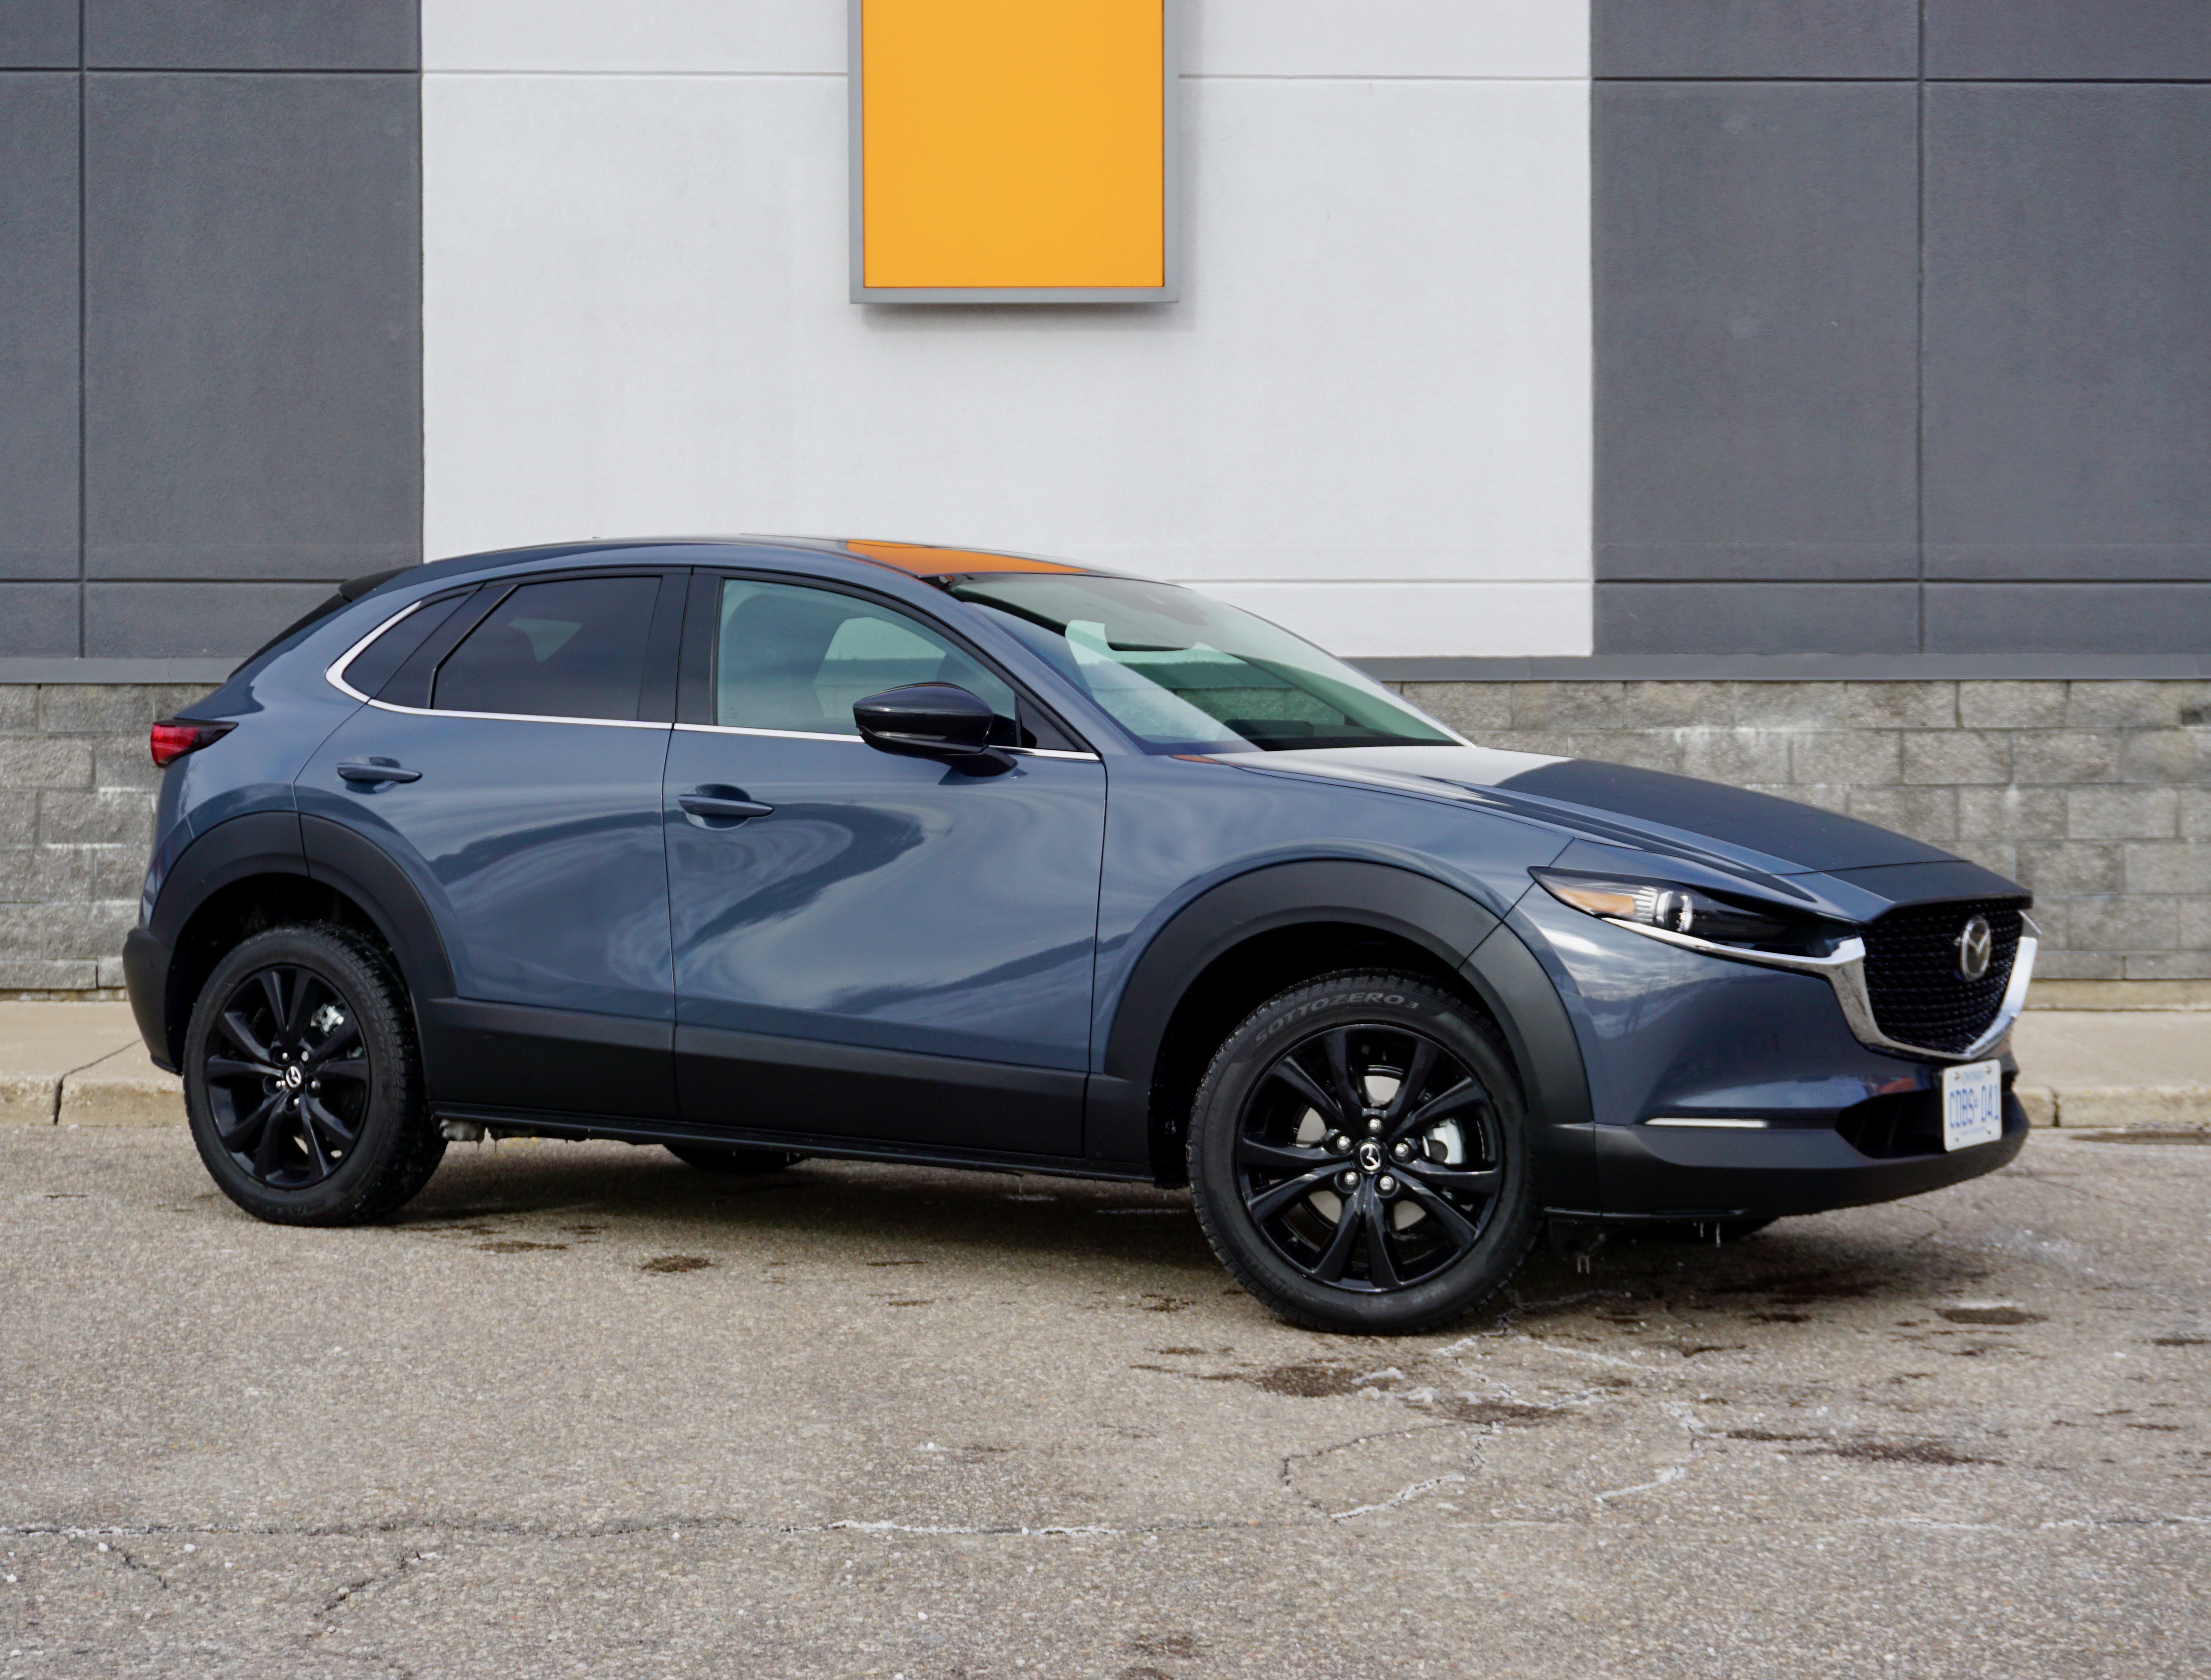 Review The Turbocharged Mazda Cx 30 Gt 2 5t Crossover Is In A Class Of Its Own The Globe And Mail